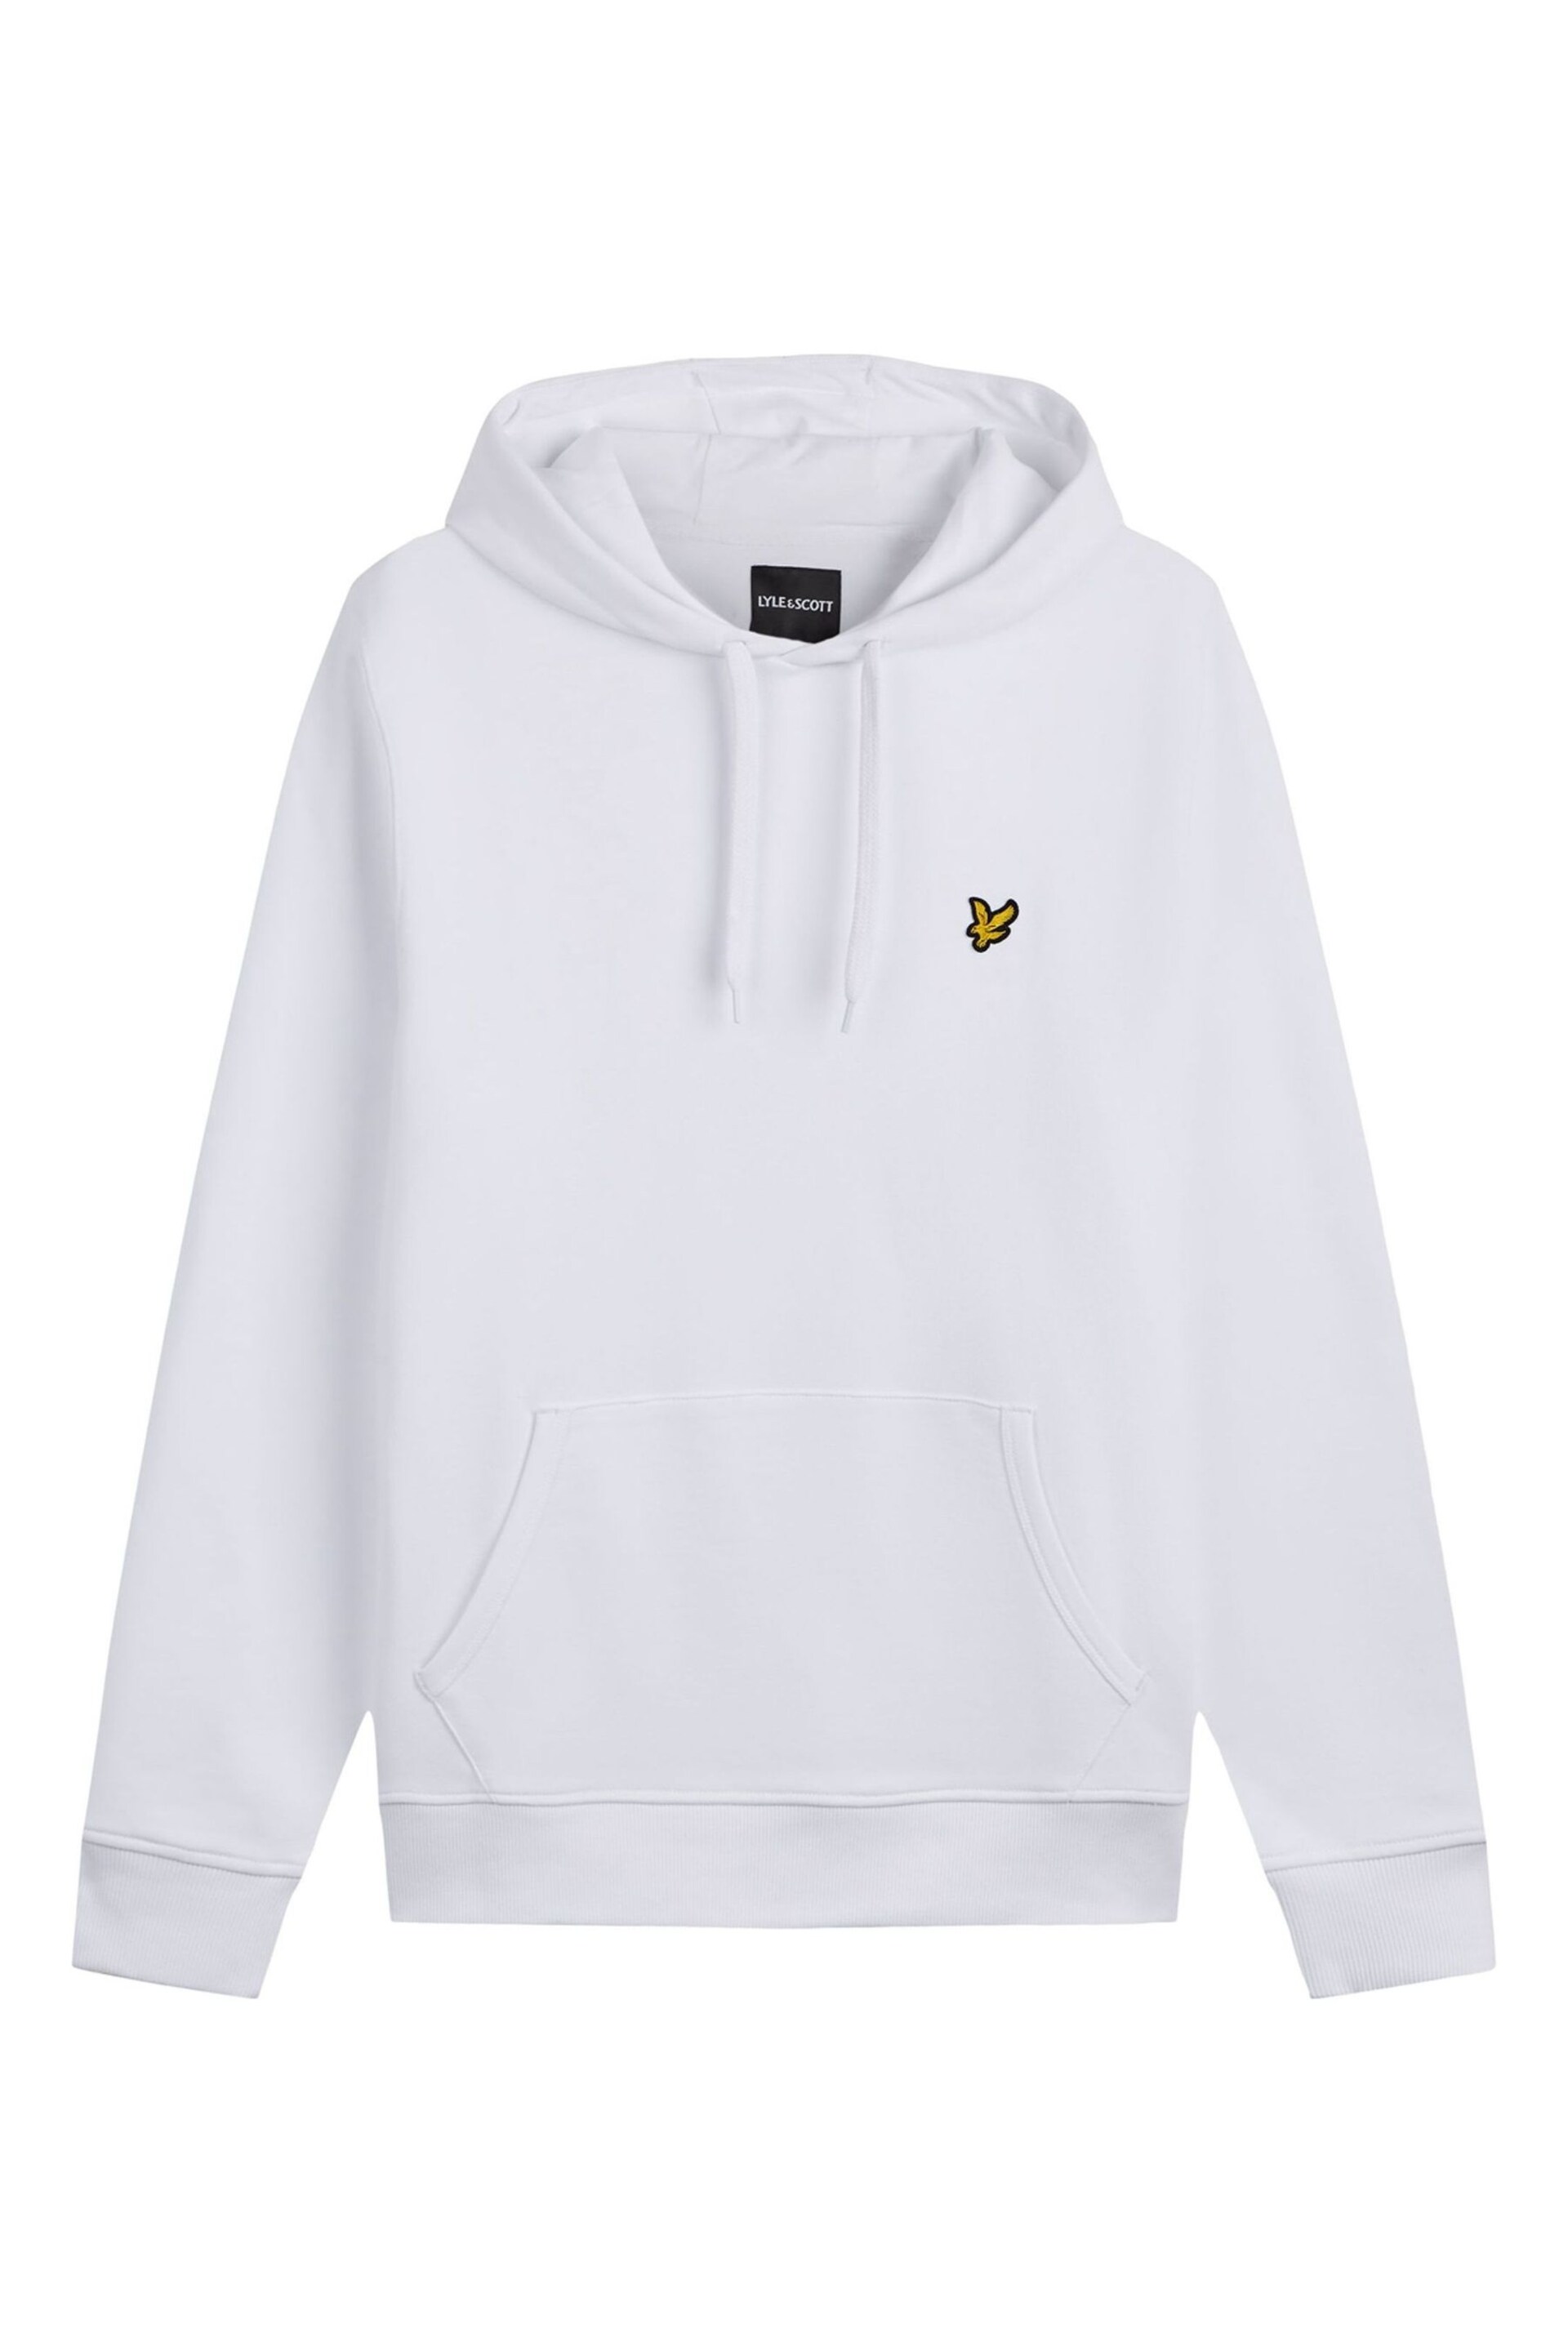 Lyle & Scott Pullover White Hoodie - Image 9 of 9